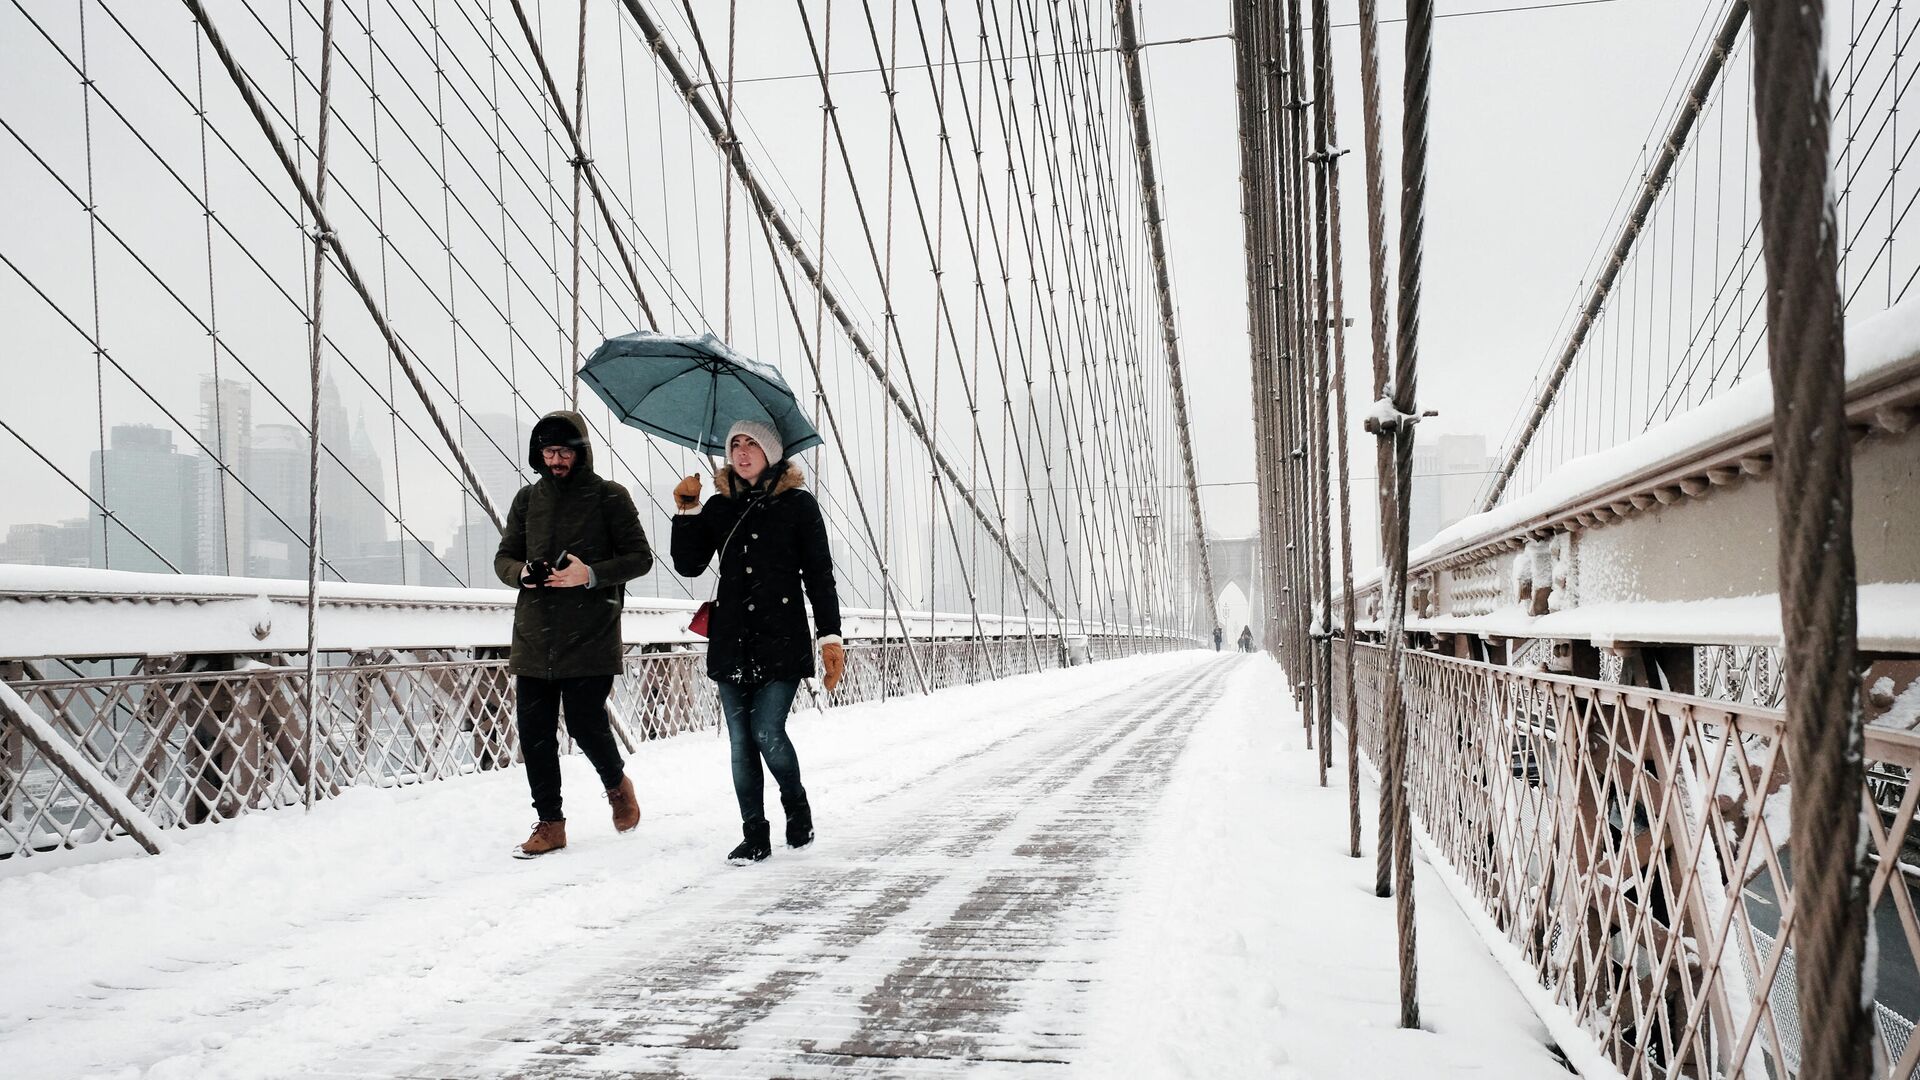 People walk through the snow on the Brooklyn Bridge in Manhattan on January 07, 2022 in New York City. New York City and much of the tri-state region received over four inches of snow in what is the first significant snow accumulation of the season. - Sputnik International, 1920, 07.01.2022